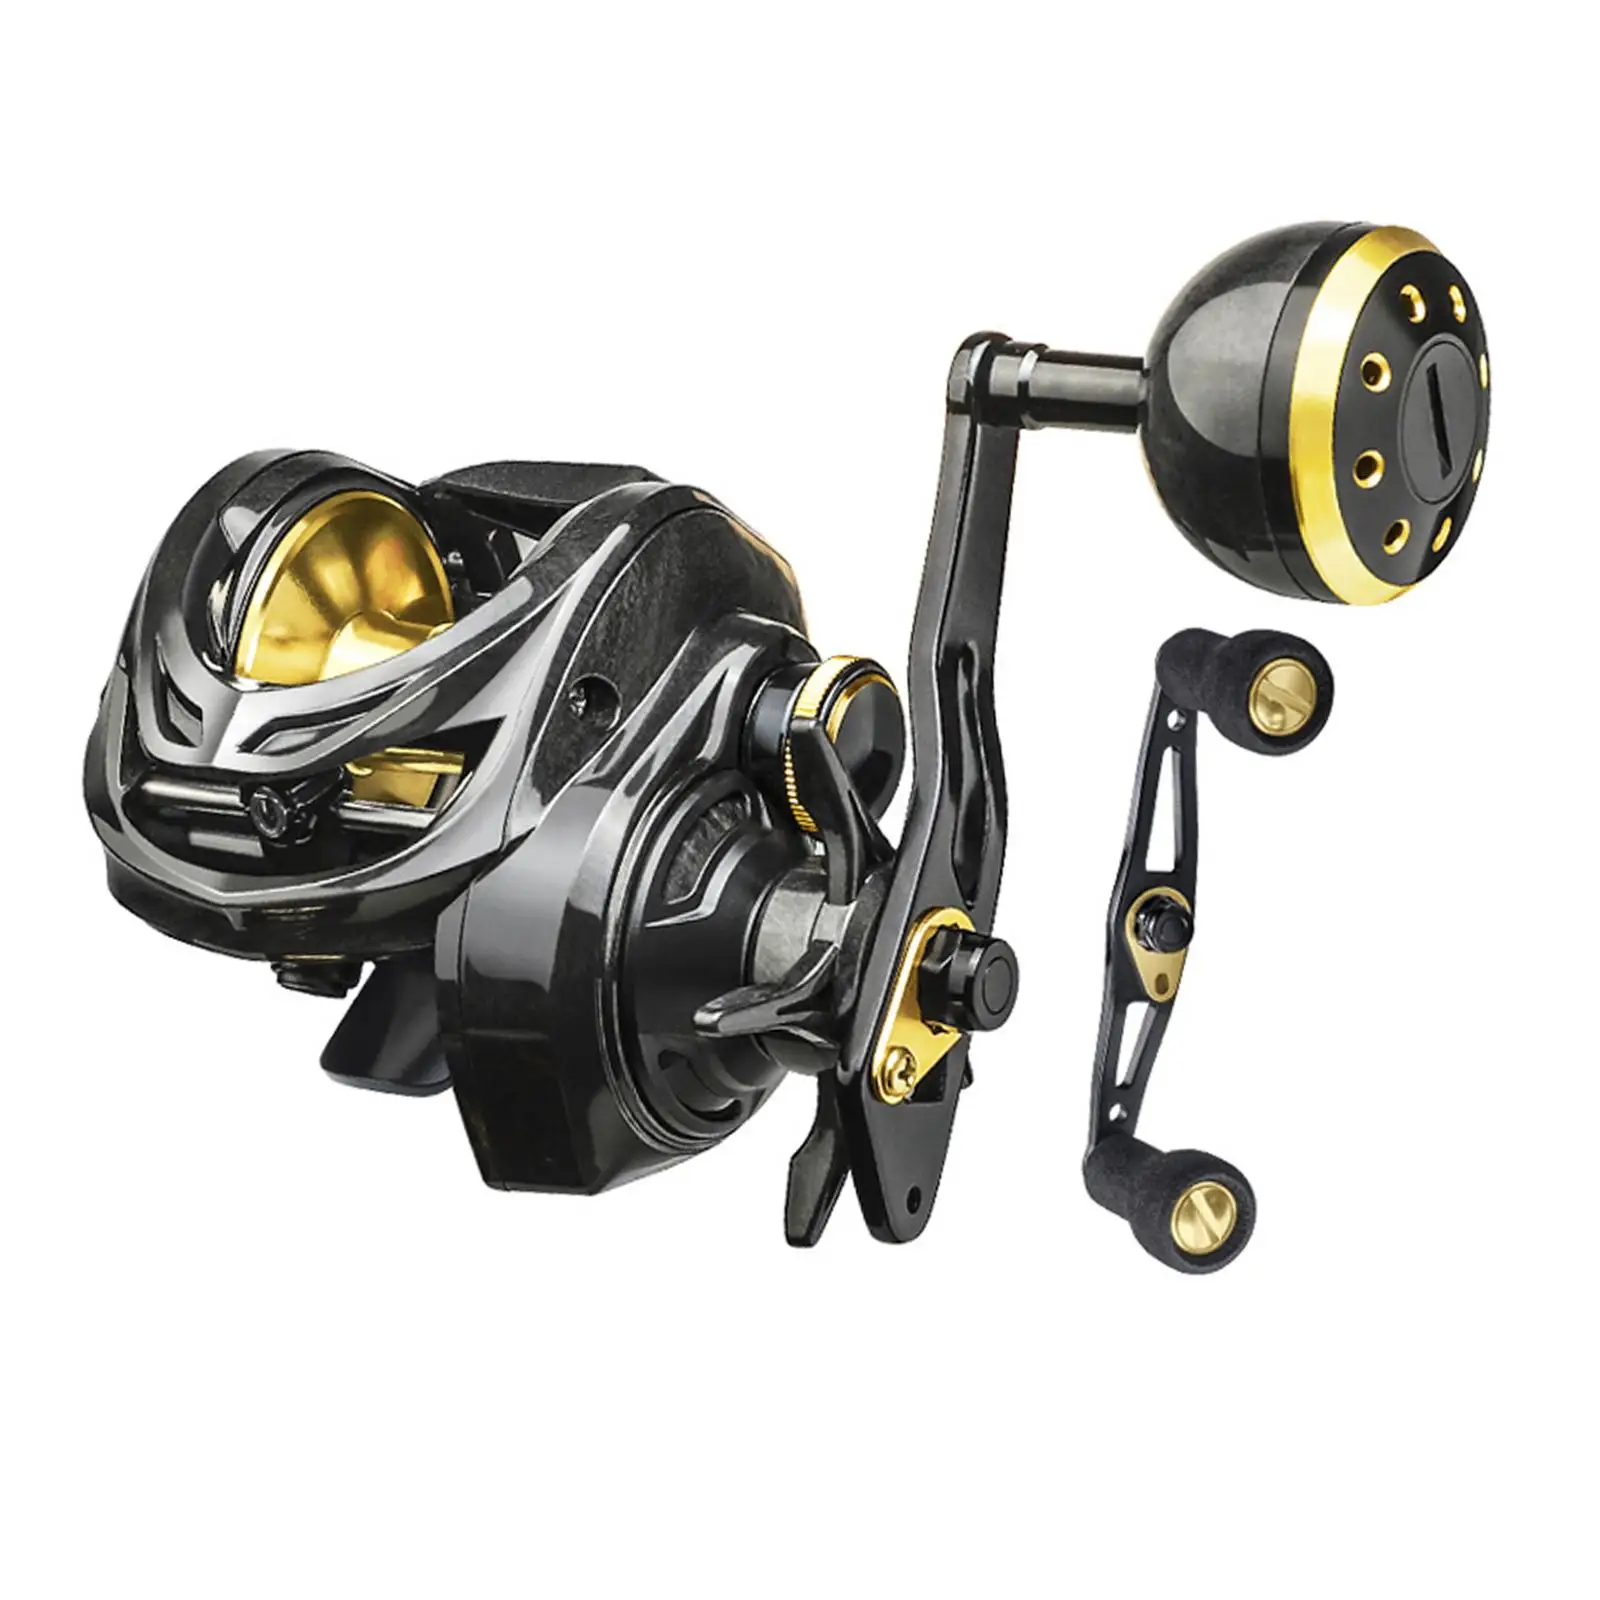 6.3:1 Gear Ratio Casting Speed N48 Level Brakecaster Reelcasting